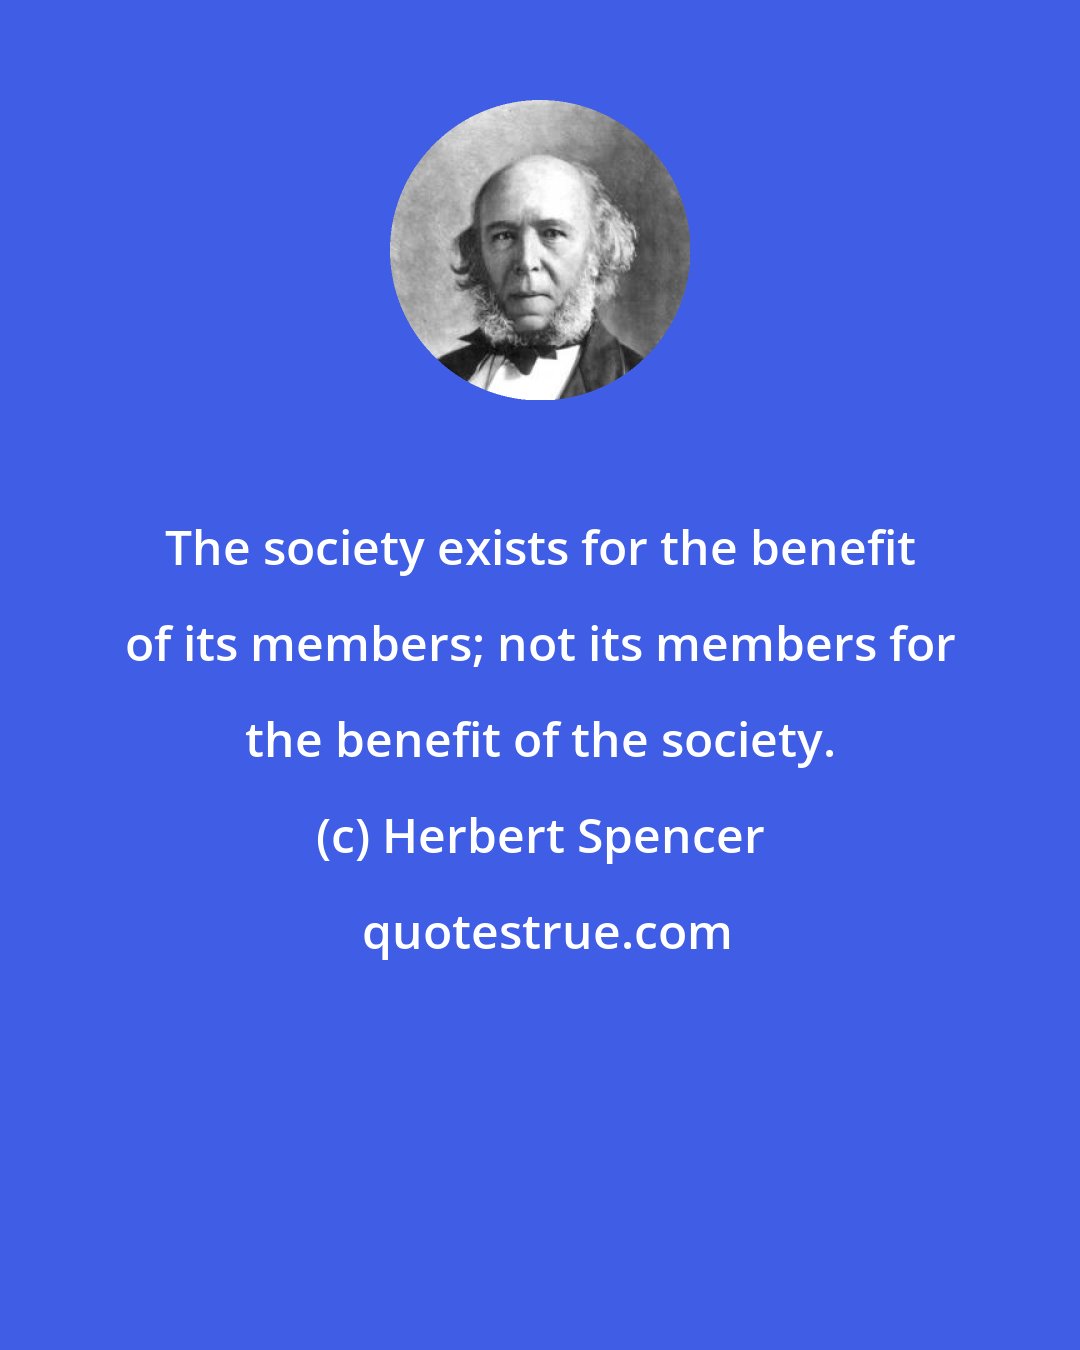 Herbert Spencer: The society exists for the benefit of its members; not its members for the benefit of the society.